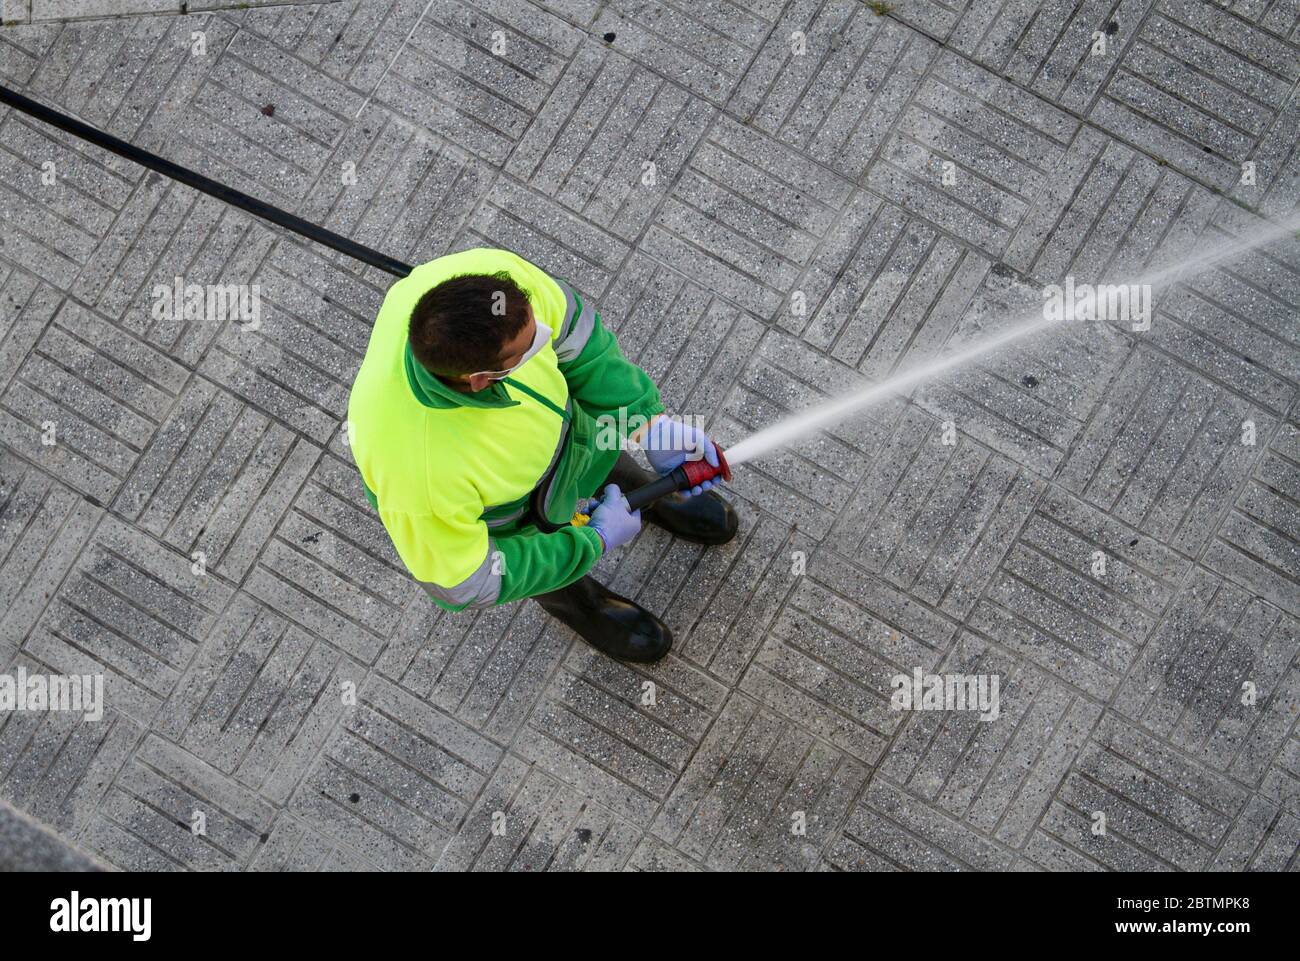 Worker holding a hose cleaning the sidewalk with water. Urban Maintenance or cleaning concept Stock Photo